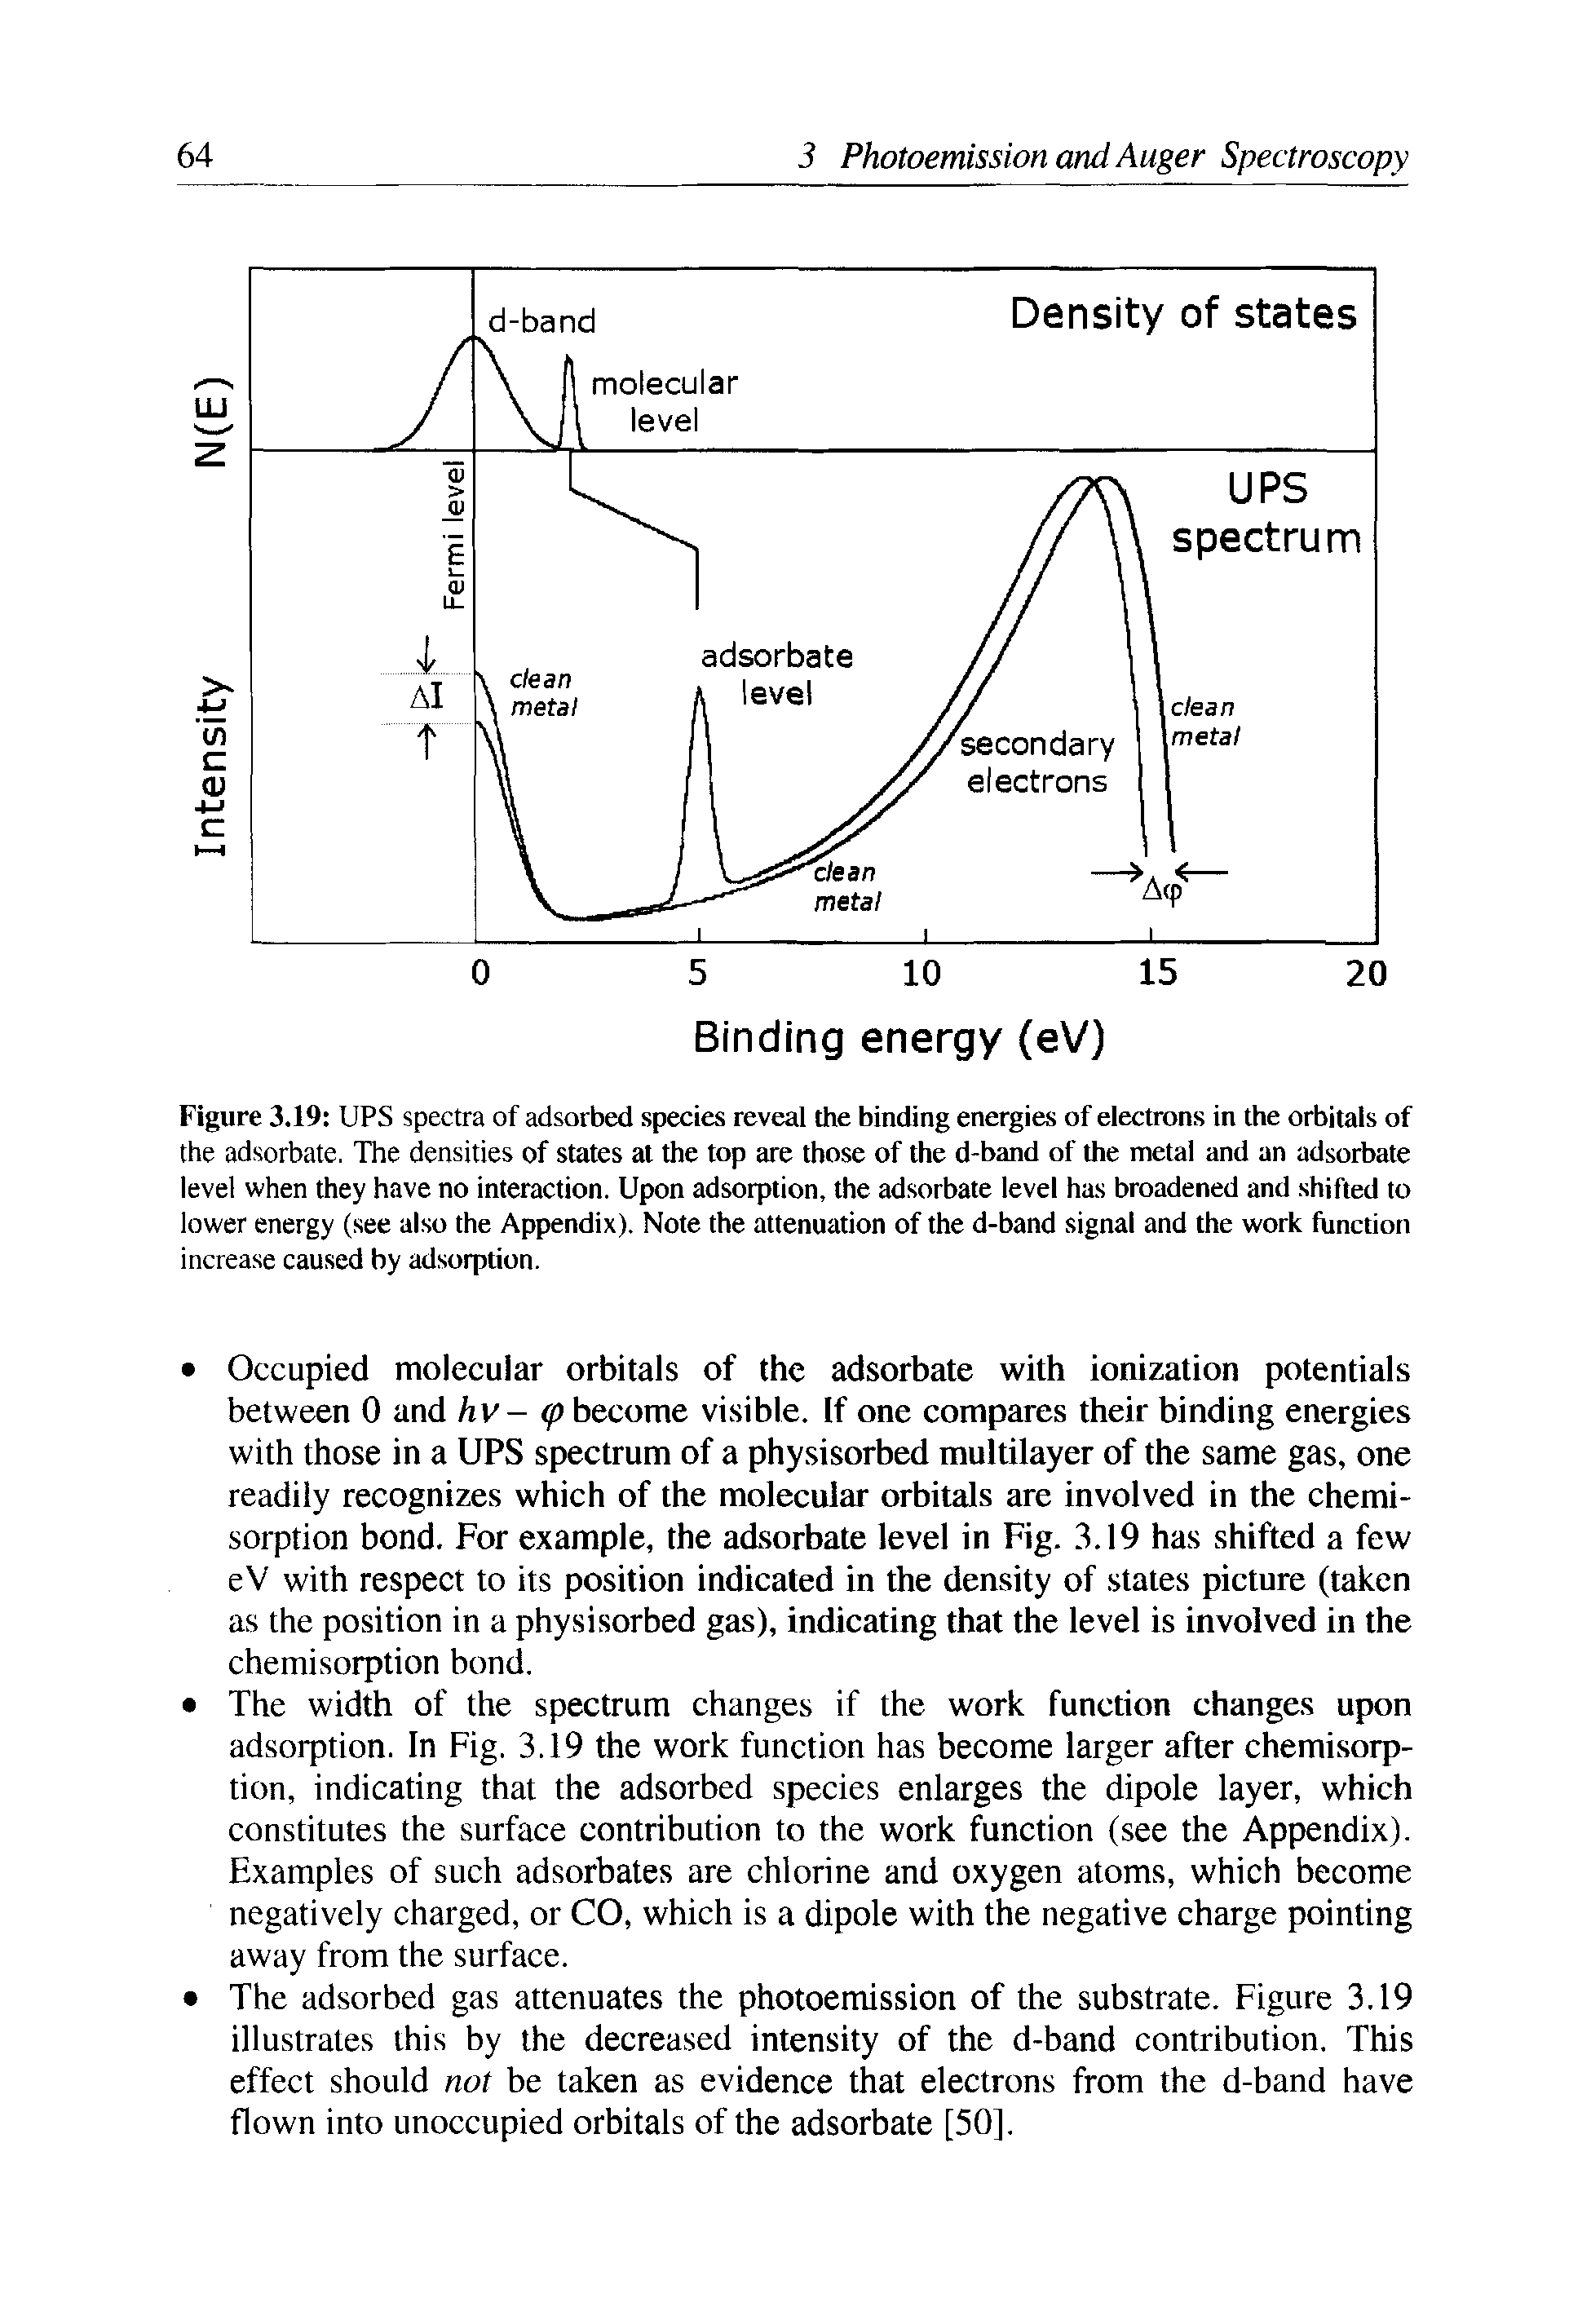 Figure 3.19 UPS spectra of adsorbed species reveal the binding energies of electrons in the orbitals of the adsorbate. The densities of states at the top are those of the d-band of the metal and an adsorbate level when they have no interaction. Upon adsorption, the adsorbate level has broadened and shifted to lower energy (see also the Appendix). Note the attenuation of the d-band signal and the work function increase caused by adsorption.